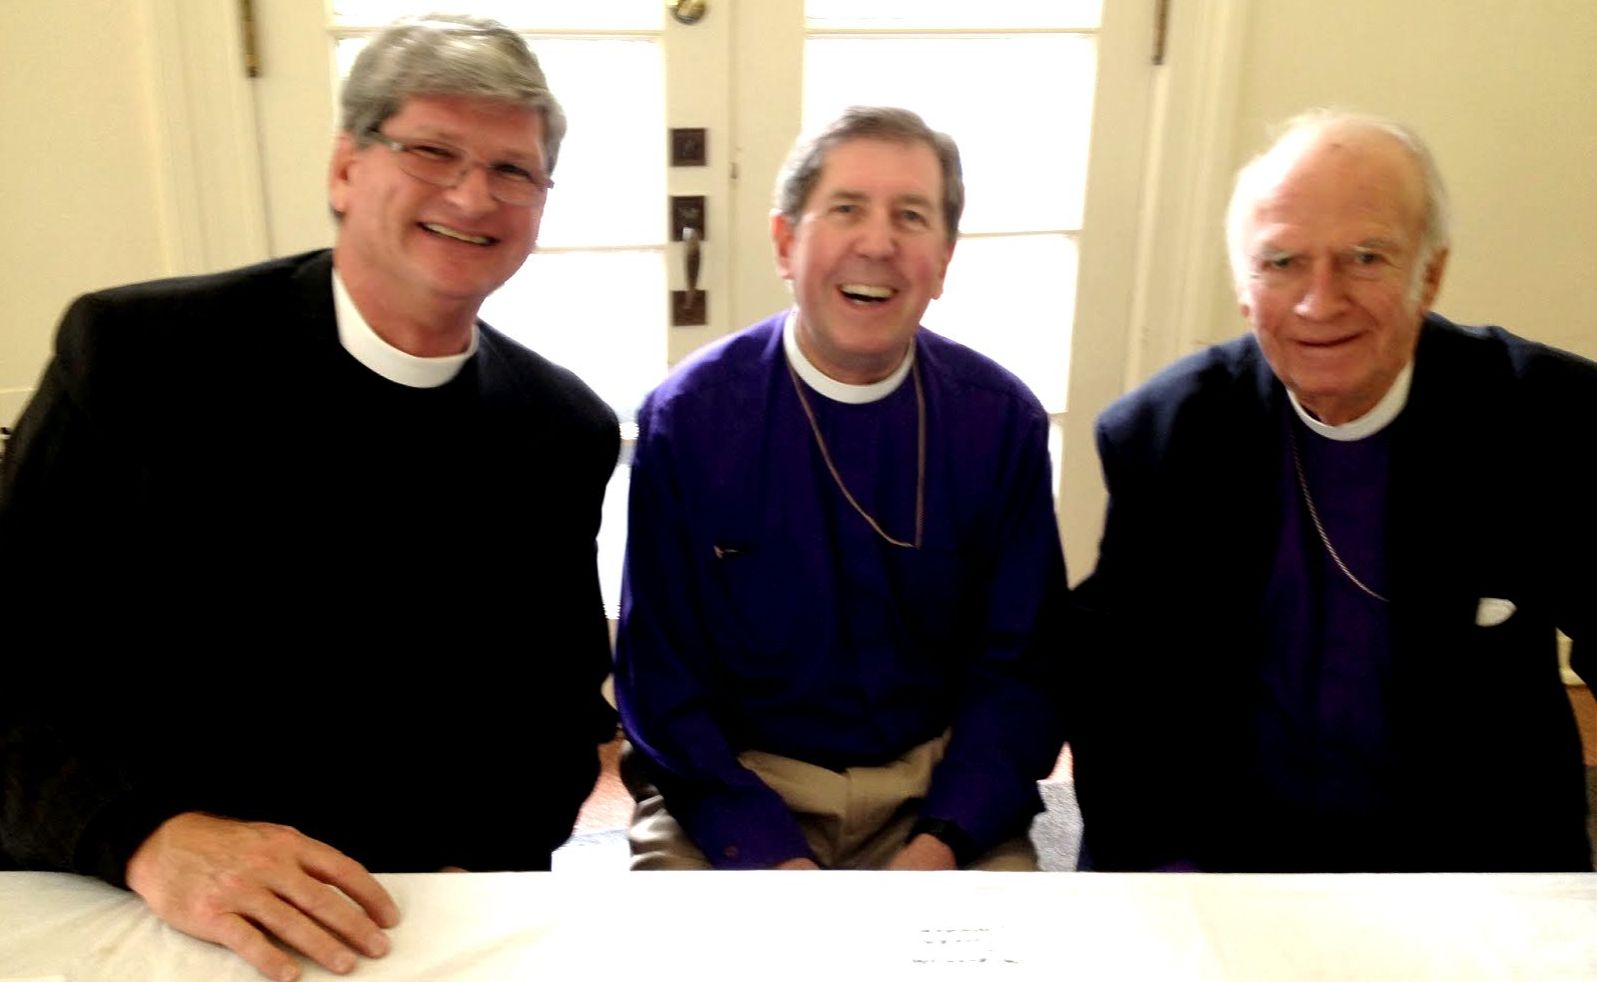 From left, the Rt. Rev. William H. Stokes, 12th Bishop of New Jersey, the Right Rev. George Councell, 11th Bishop of New Jersey, and the Right Rev. G. P. Mellick Belshaw, 8th Bishop of New Jersey